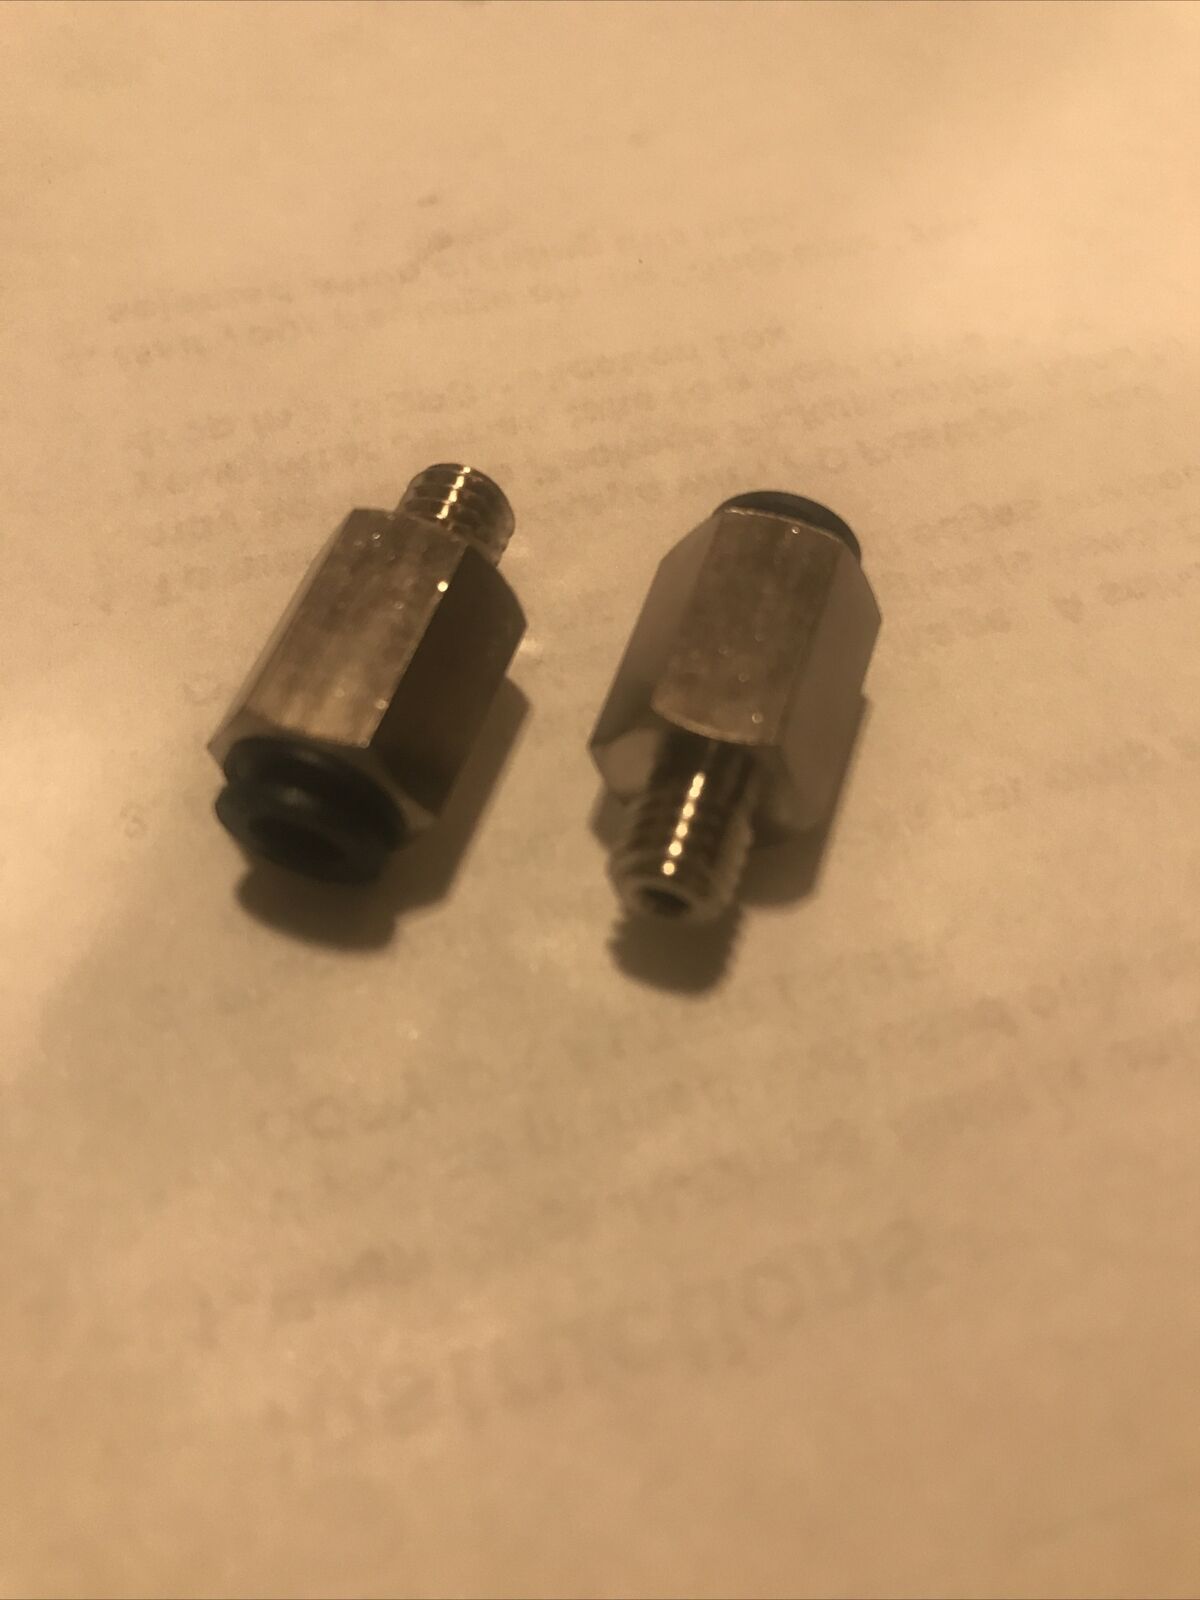 Flashforge Adventurer 3 Push-fit connector part/ This Is OEM Flash forge Parts